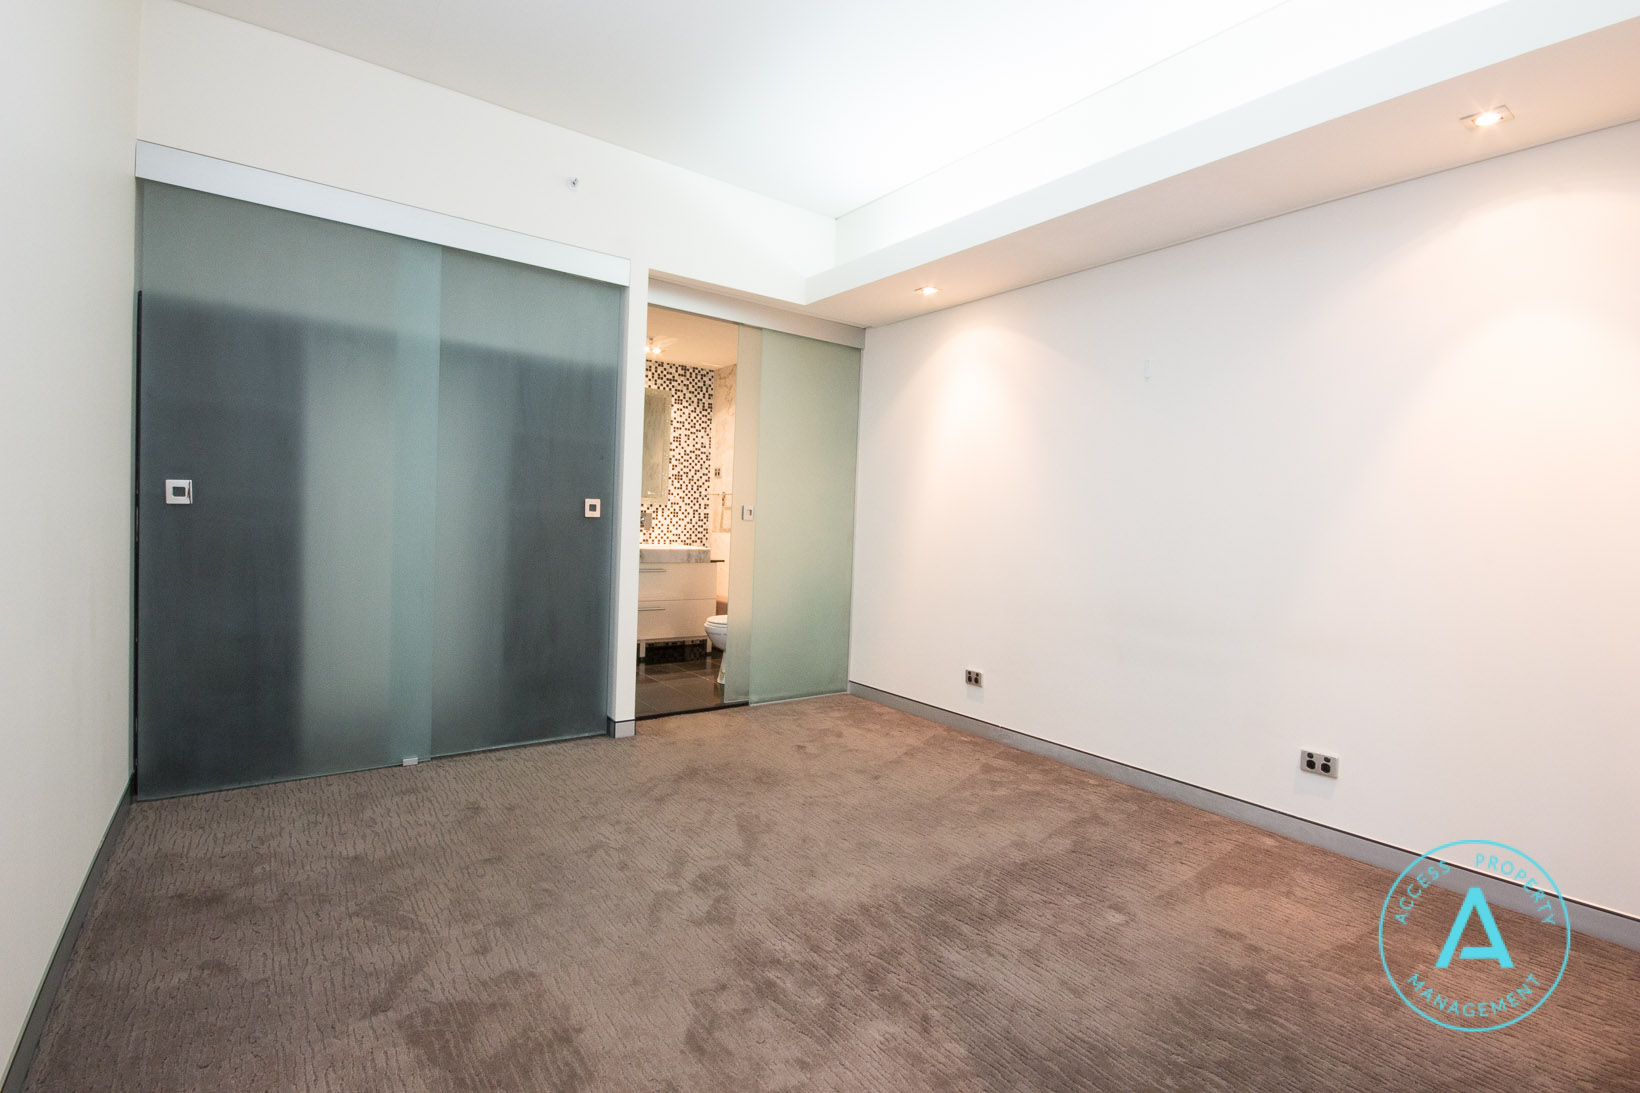 Access Property Management 99, 22 St Georges Terrace Bedroom